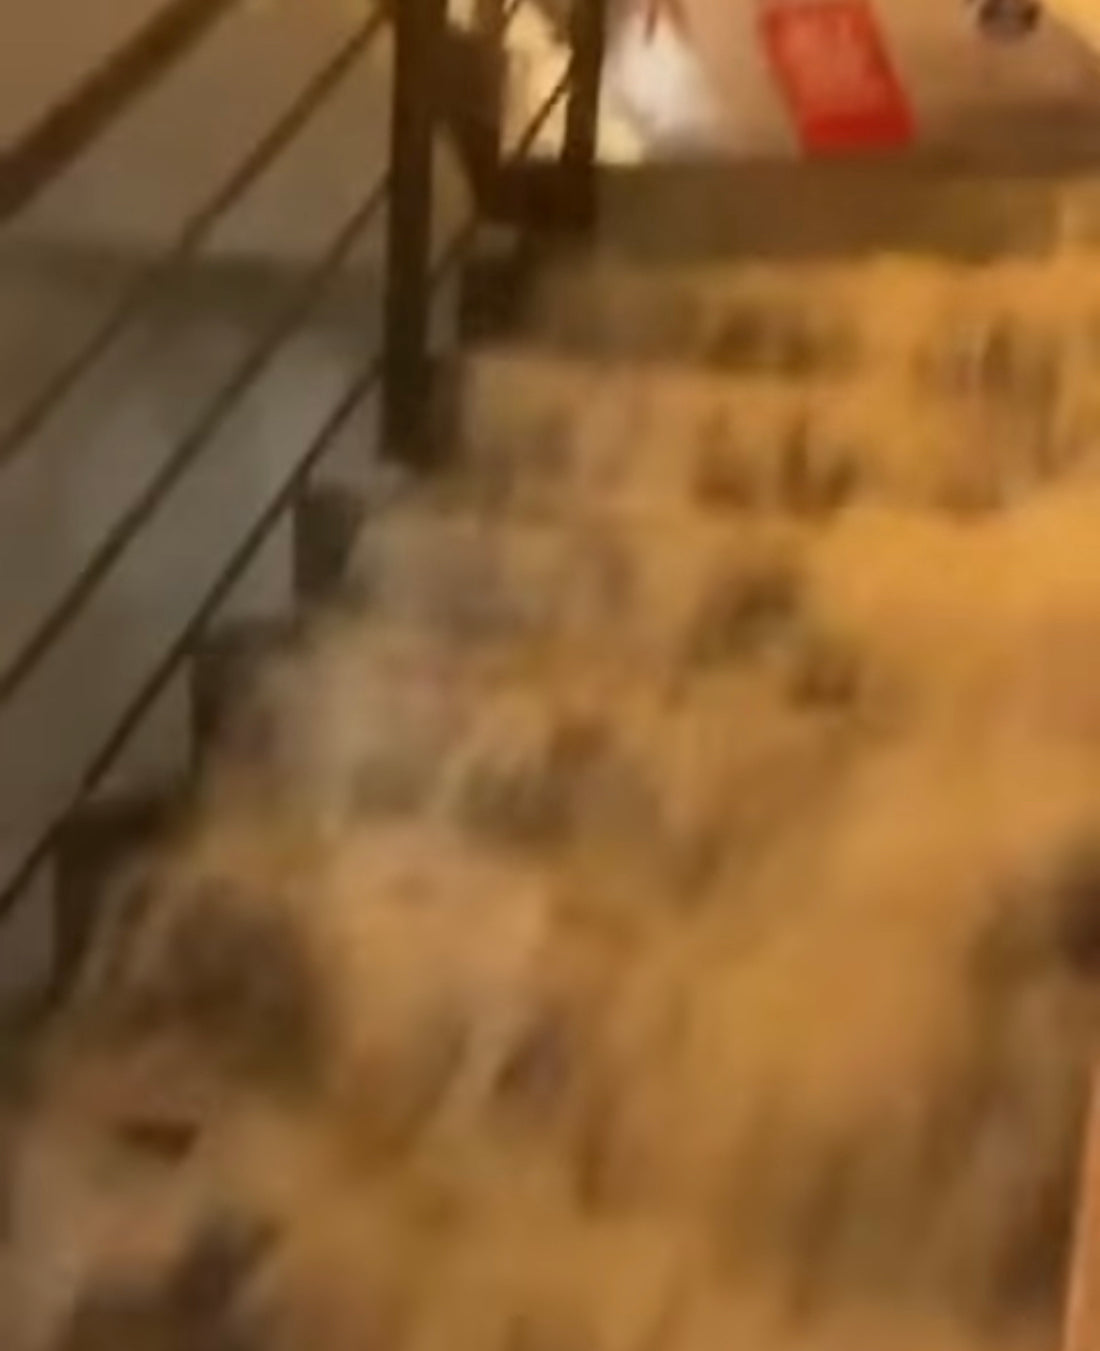 UFC’s ‘The Korean Zombie’ featherweight contender Chan Sung Jung shares shocking video of his gym being hit with record flood in Seoul, South Korea